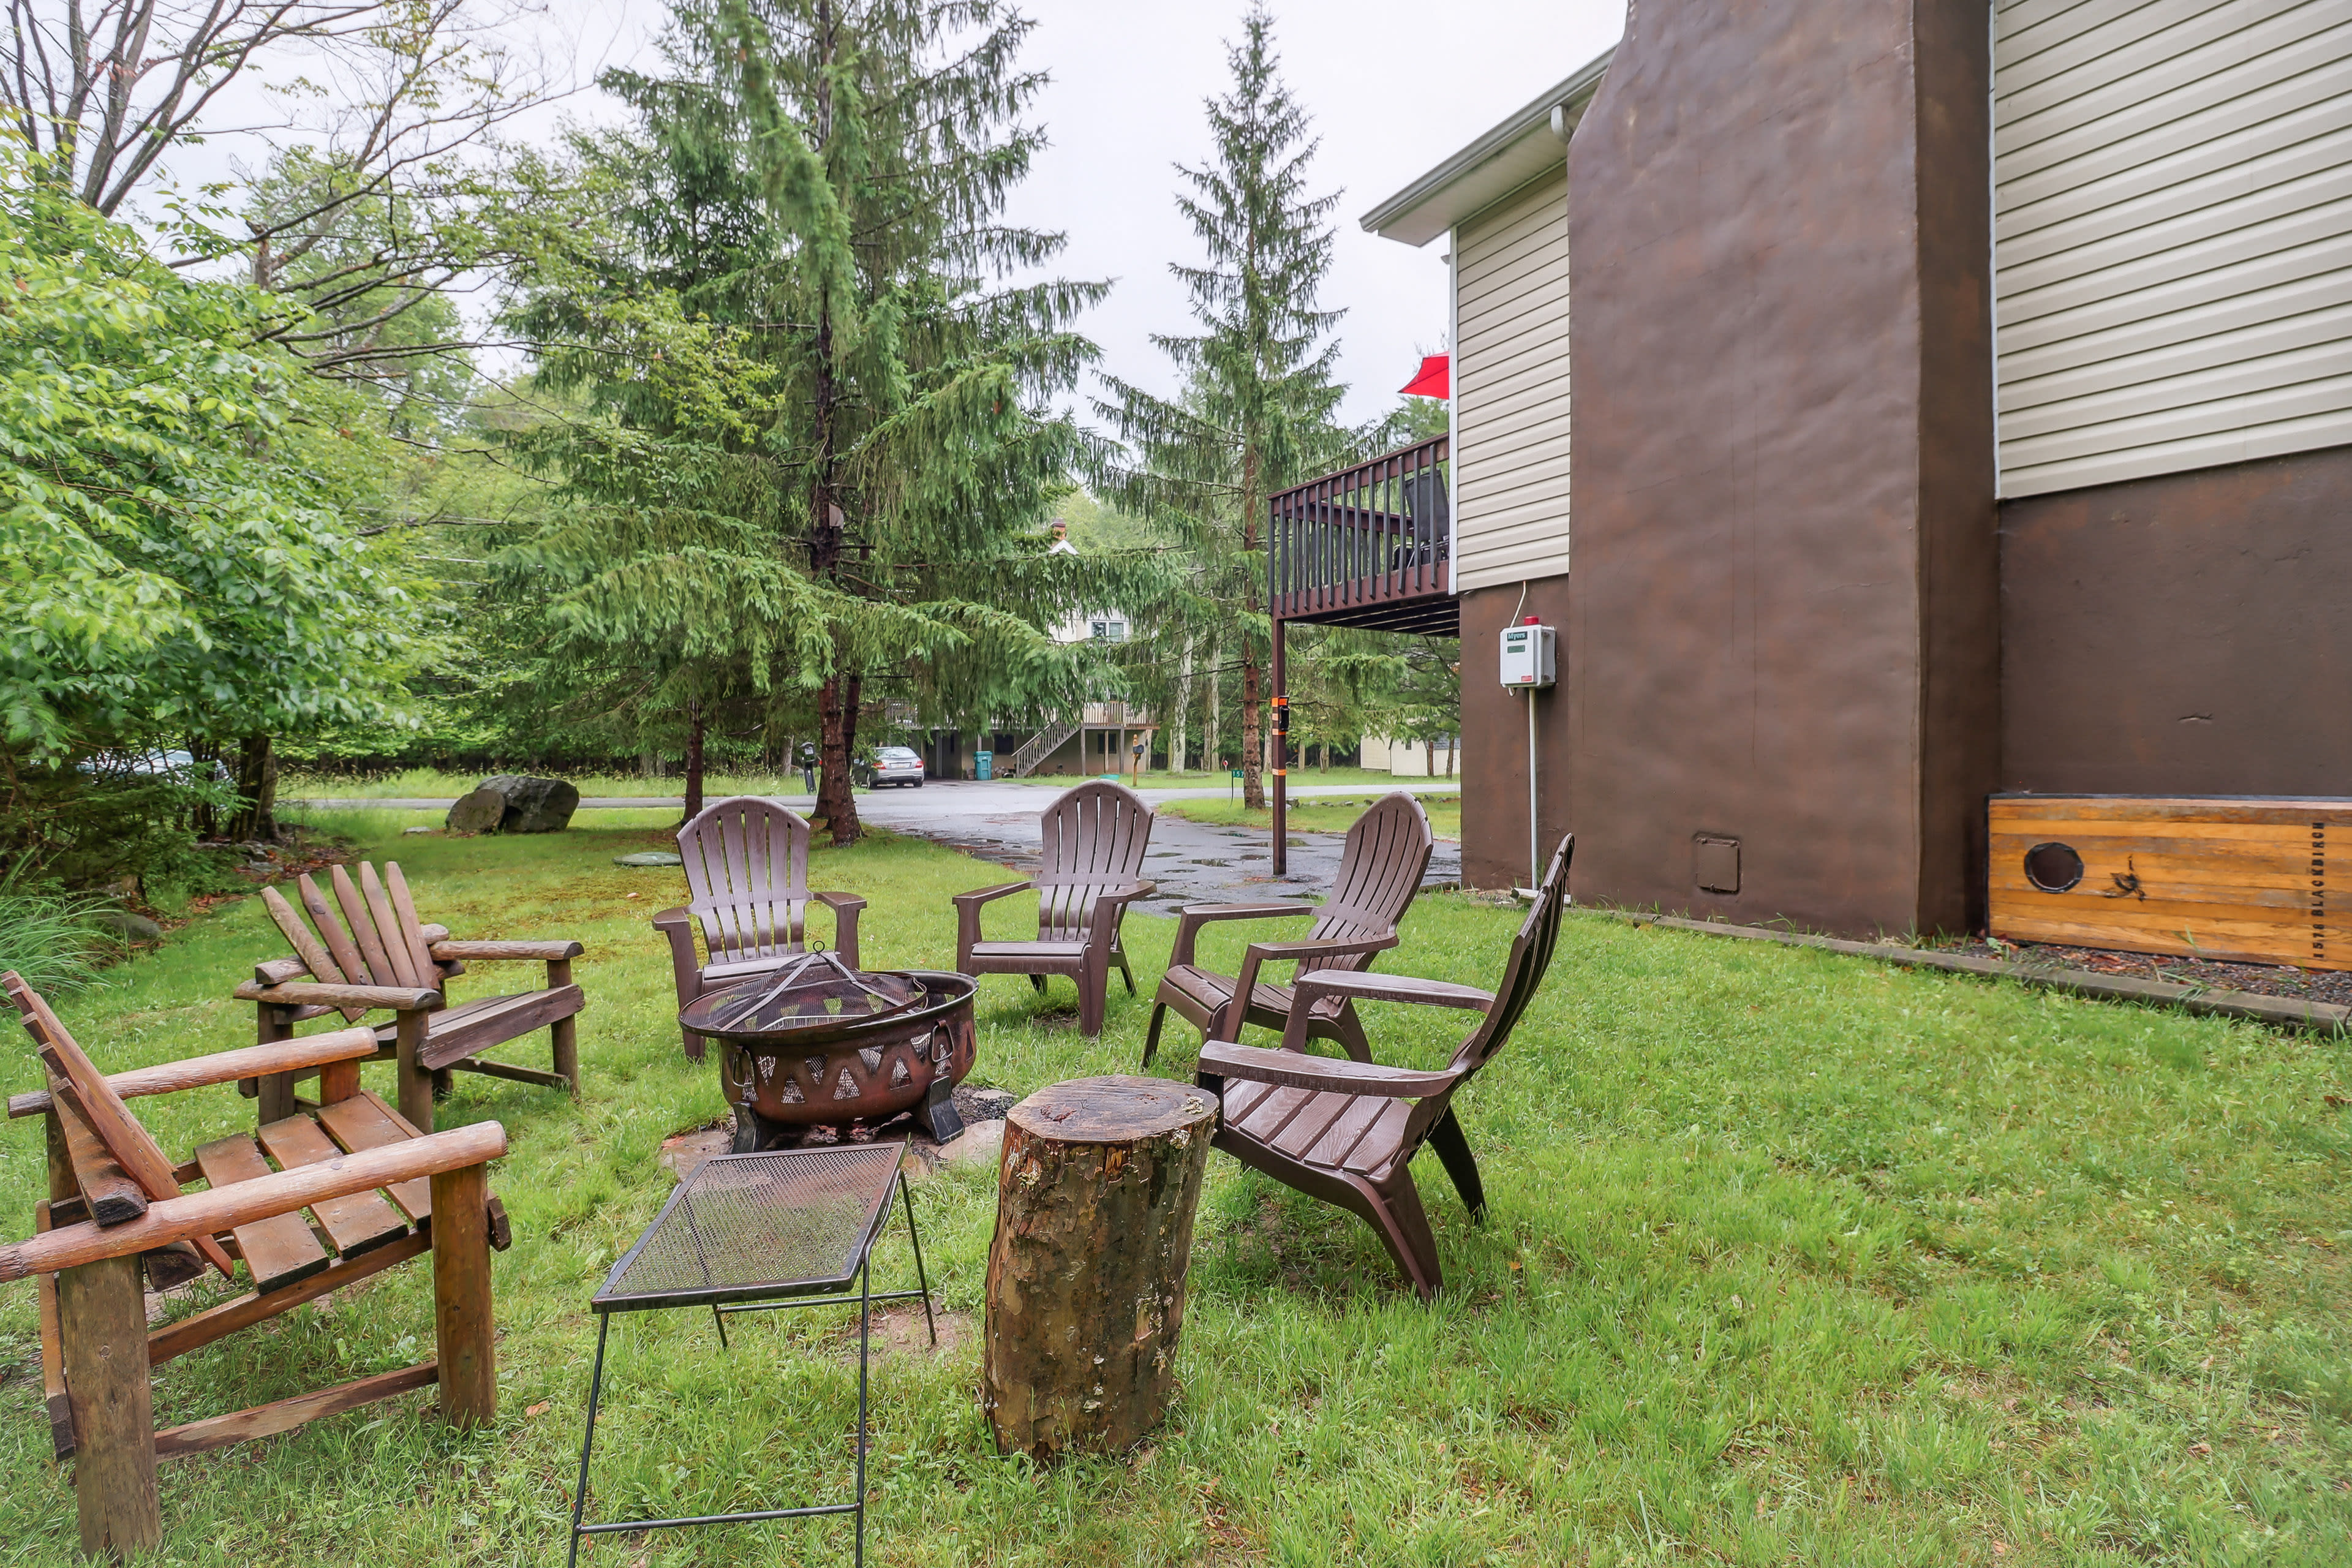 Wood-Burning Fire Pit | Outdoor Dining Area | Gas Grill | Bicycle Provided